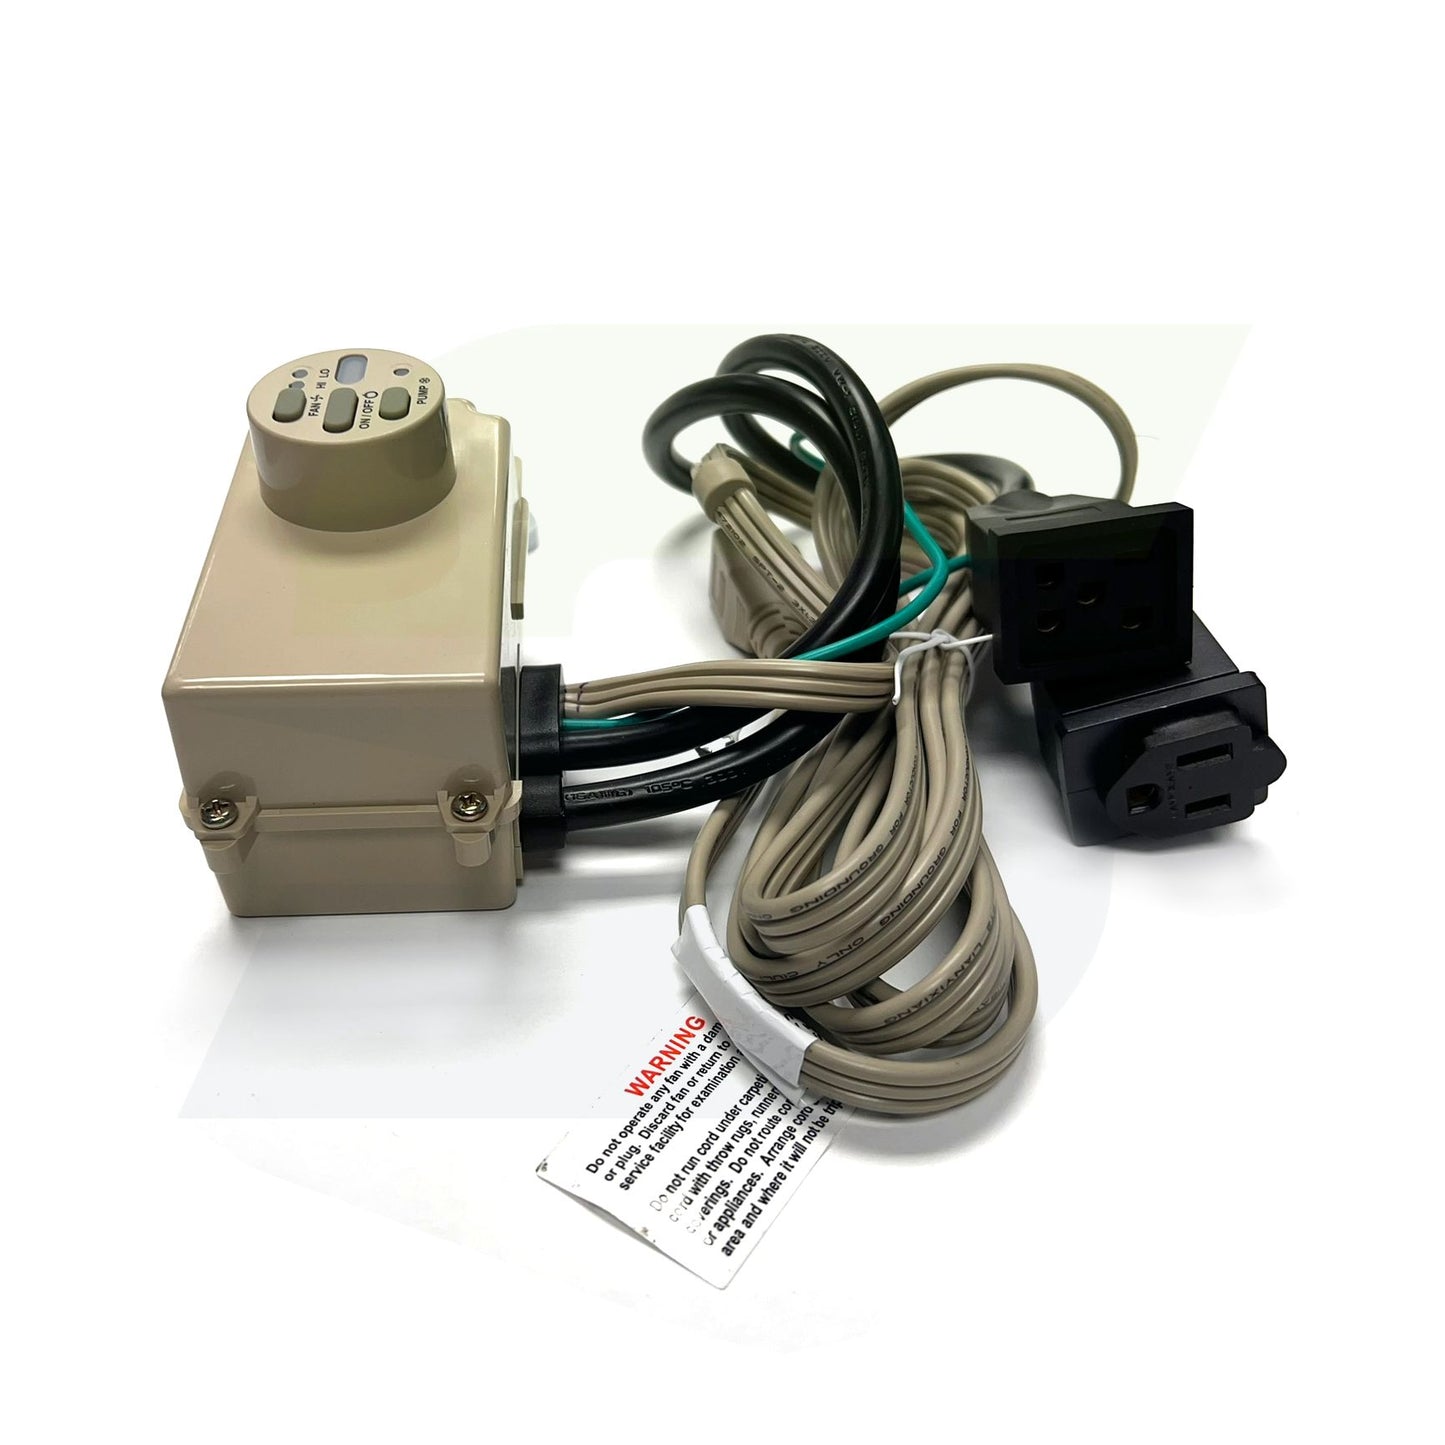 Essick Air / Champion 110400-1 Electronic Control Assembly for Evaporative Swamp Coolers